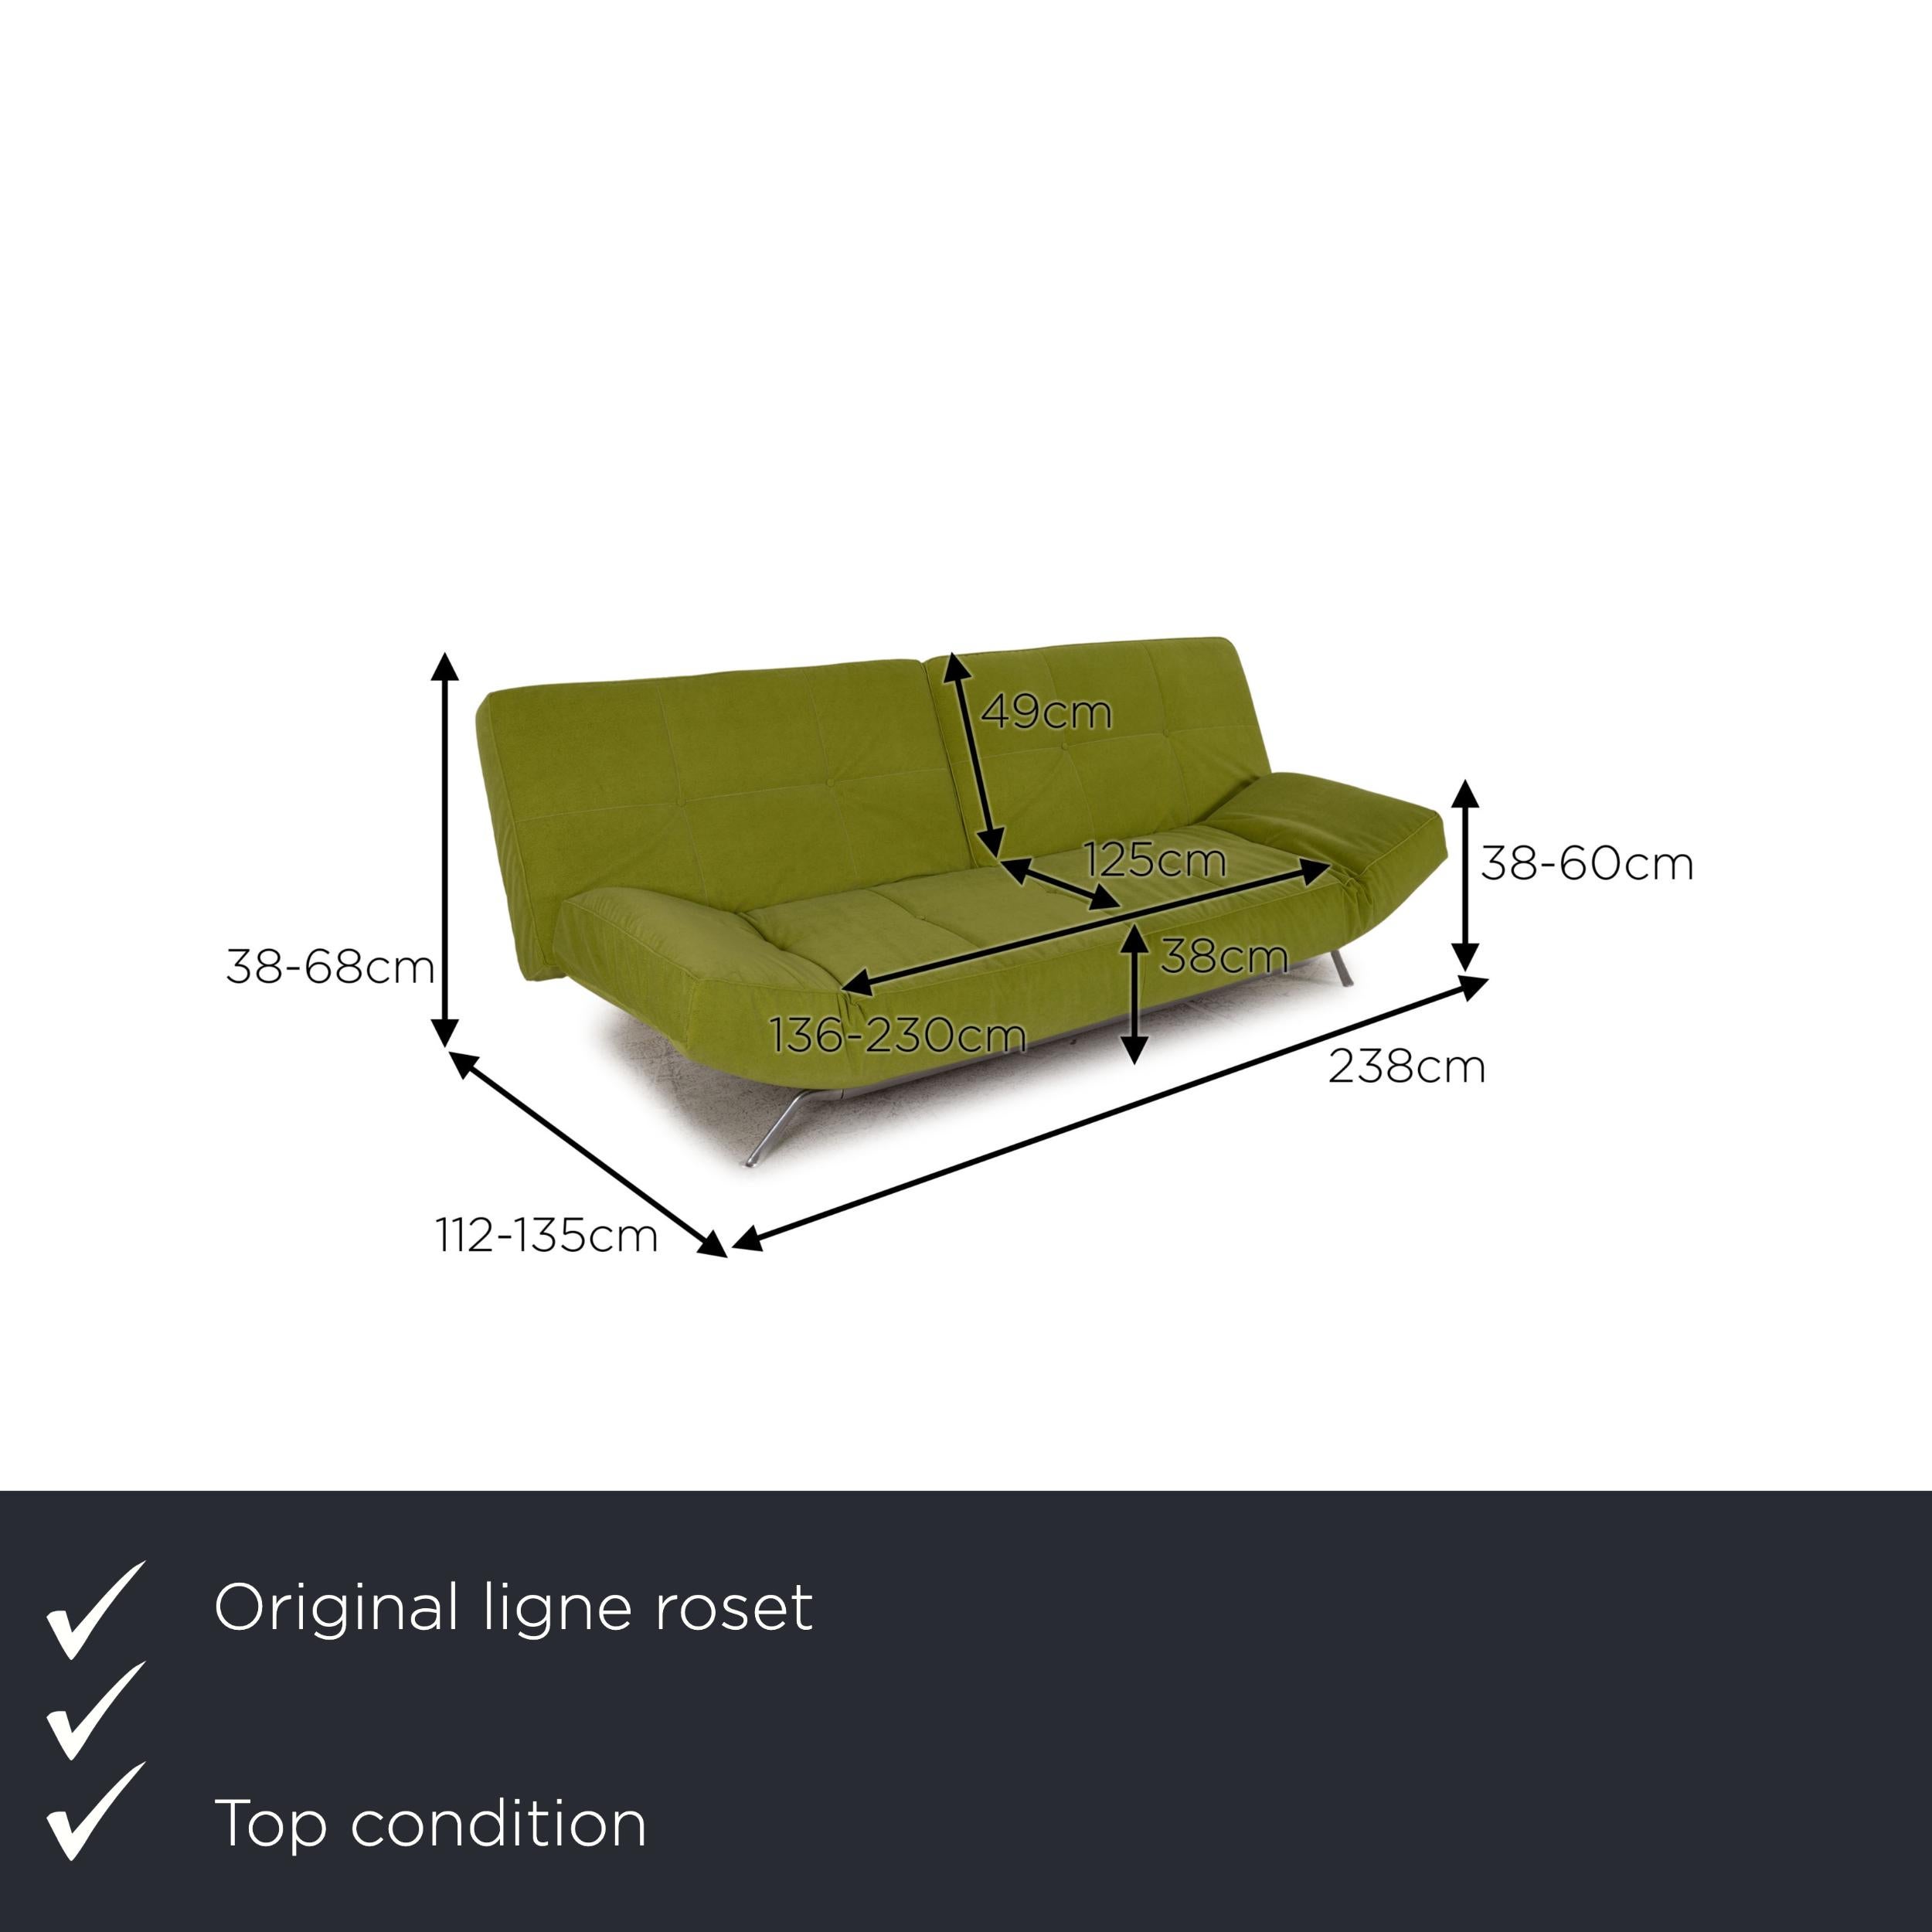 We present to you a ligne roset Smala fabric sofa green three-seater couch function sleeping.

Product measurements in centimeters:

depth: 112
width: 238
height: 38
seat height: 38
rest height: 38
seat depth: 125
seat width: 136
back